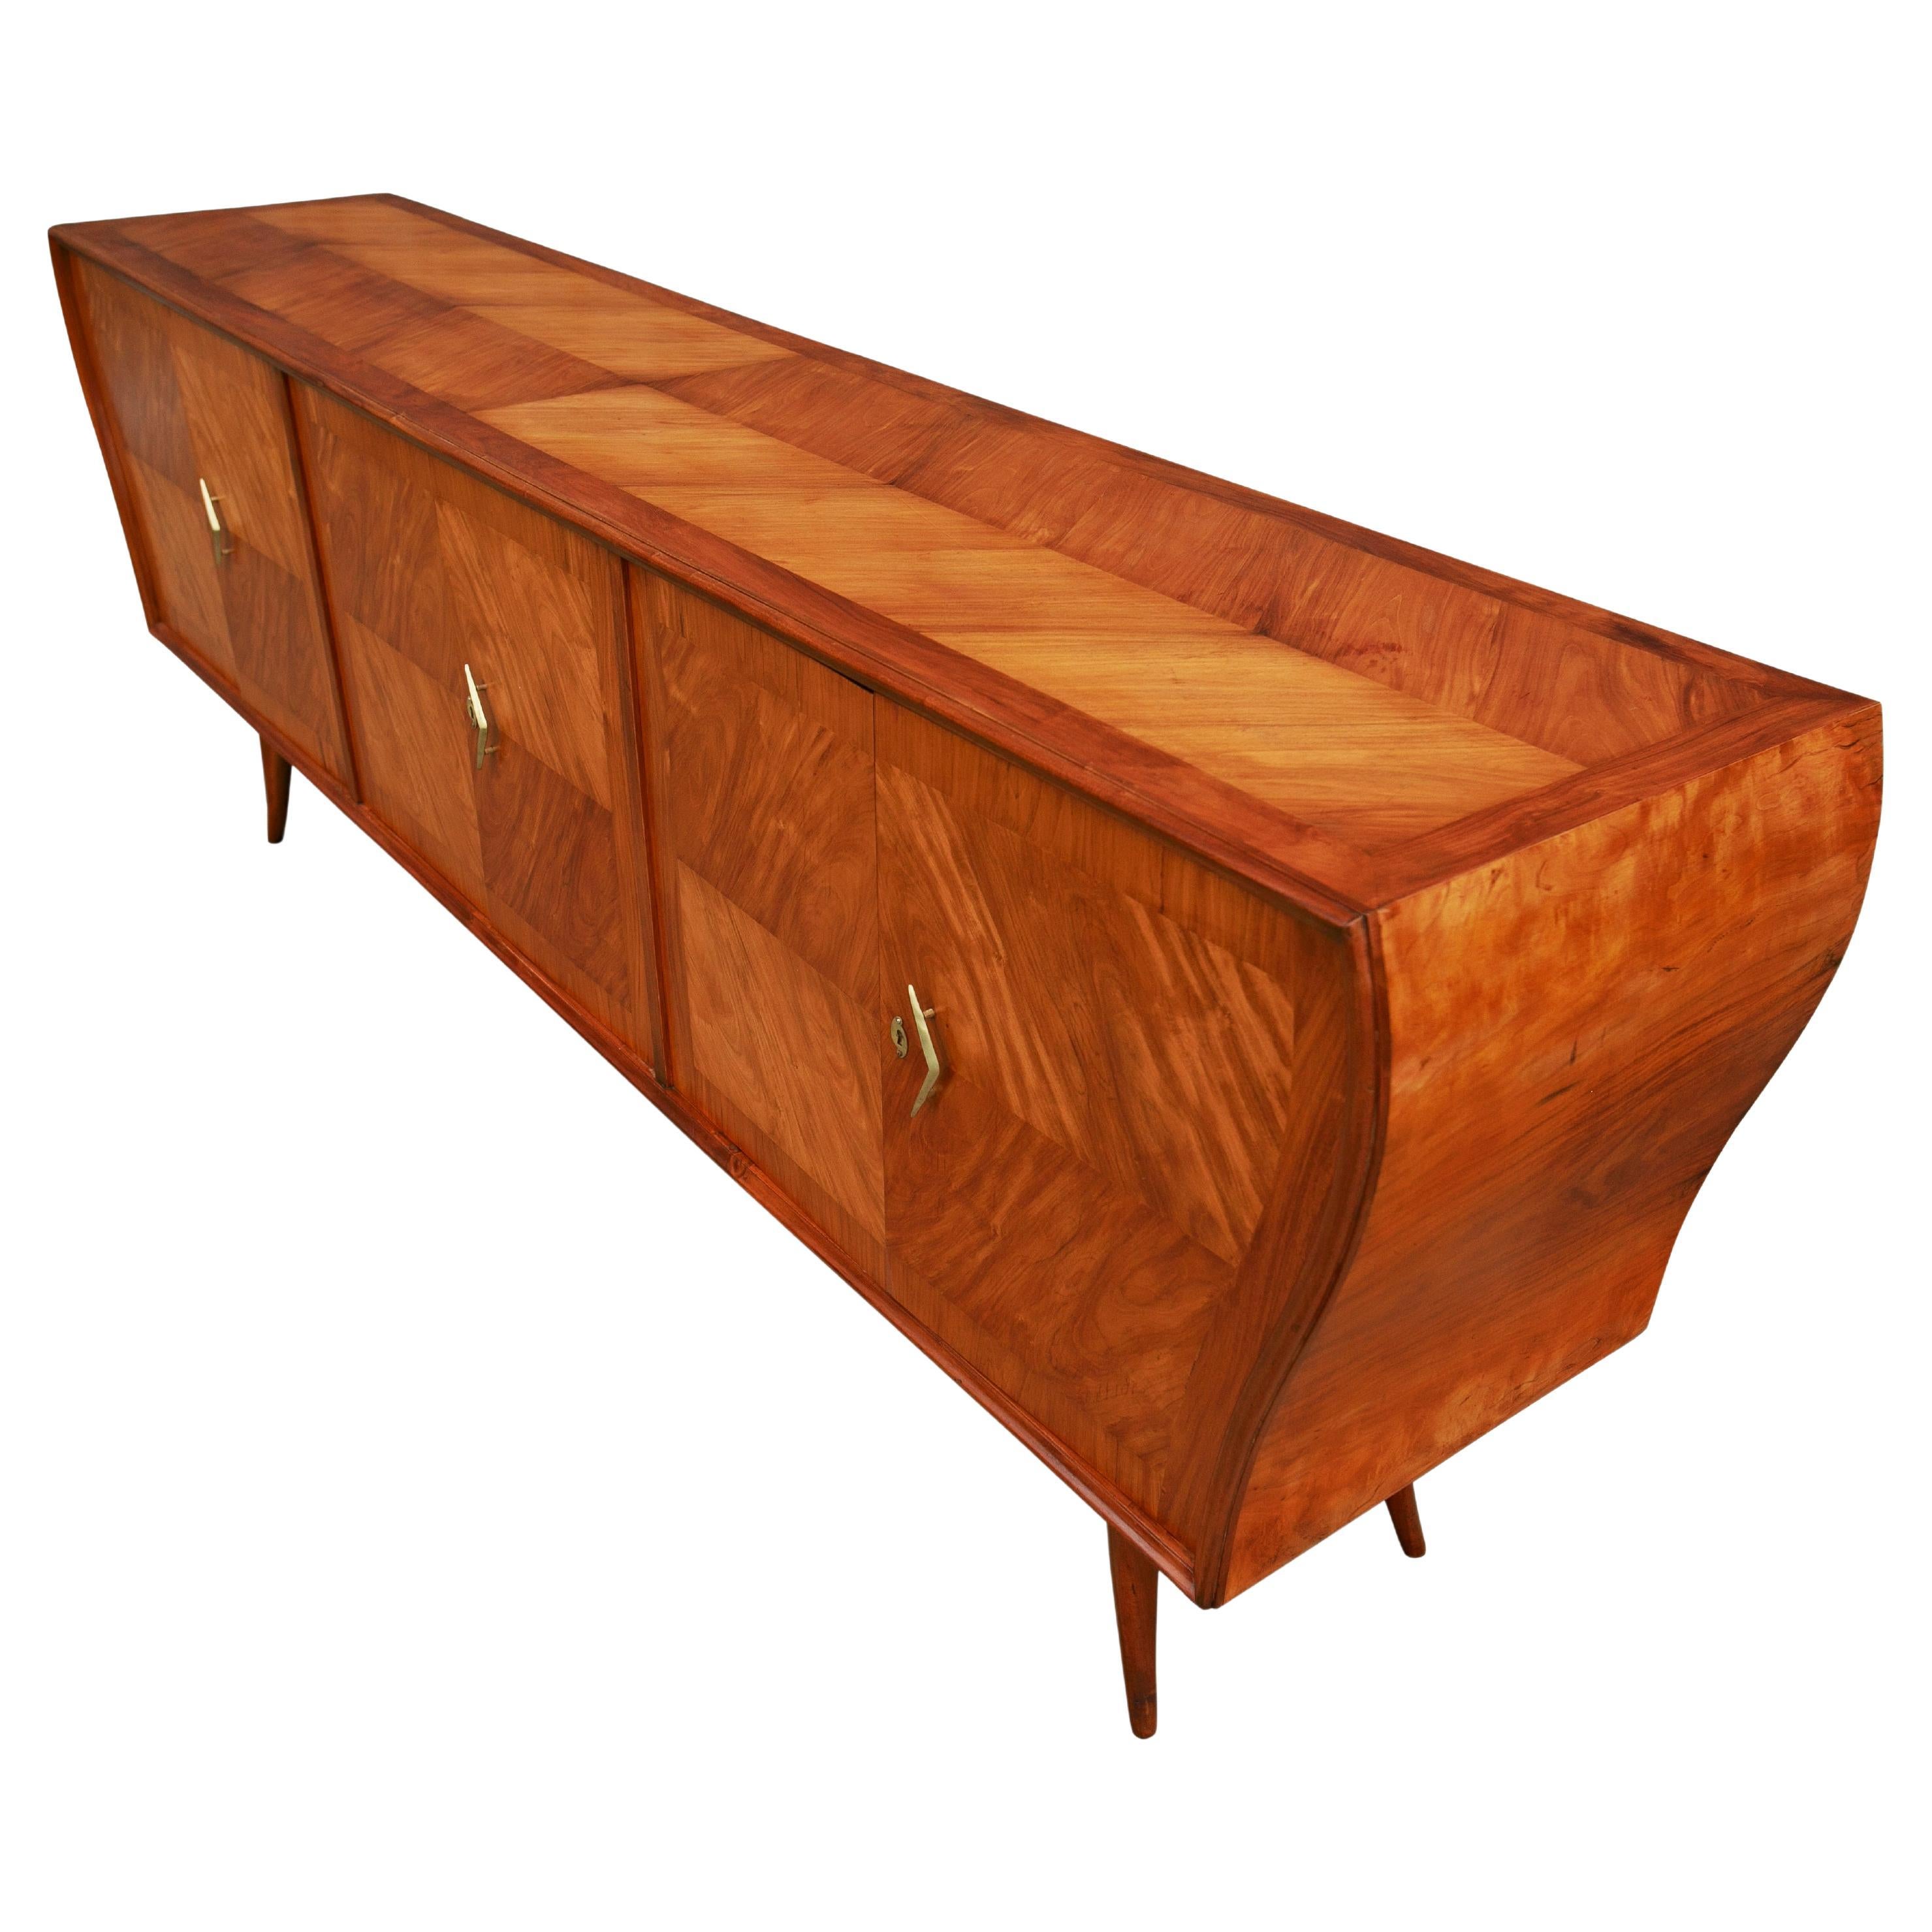 Available today, this one-of-a-kind Mid-Century Modern Credenza in Caviuna Hardwood designed by Ando in the fifties is the FIND of the year and is nothing less than spectacular.

The credenza is made of solid Caviuna wood and features four curved